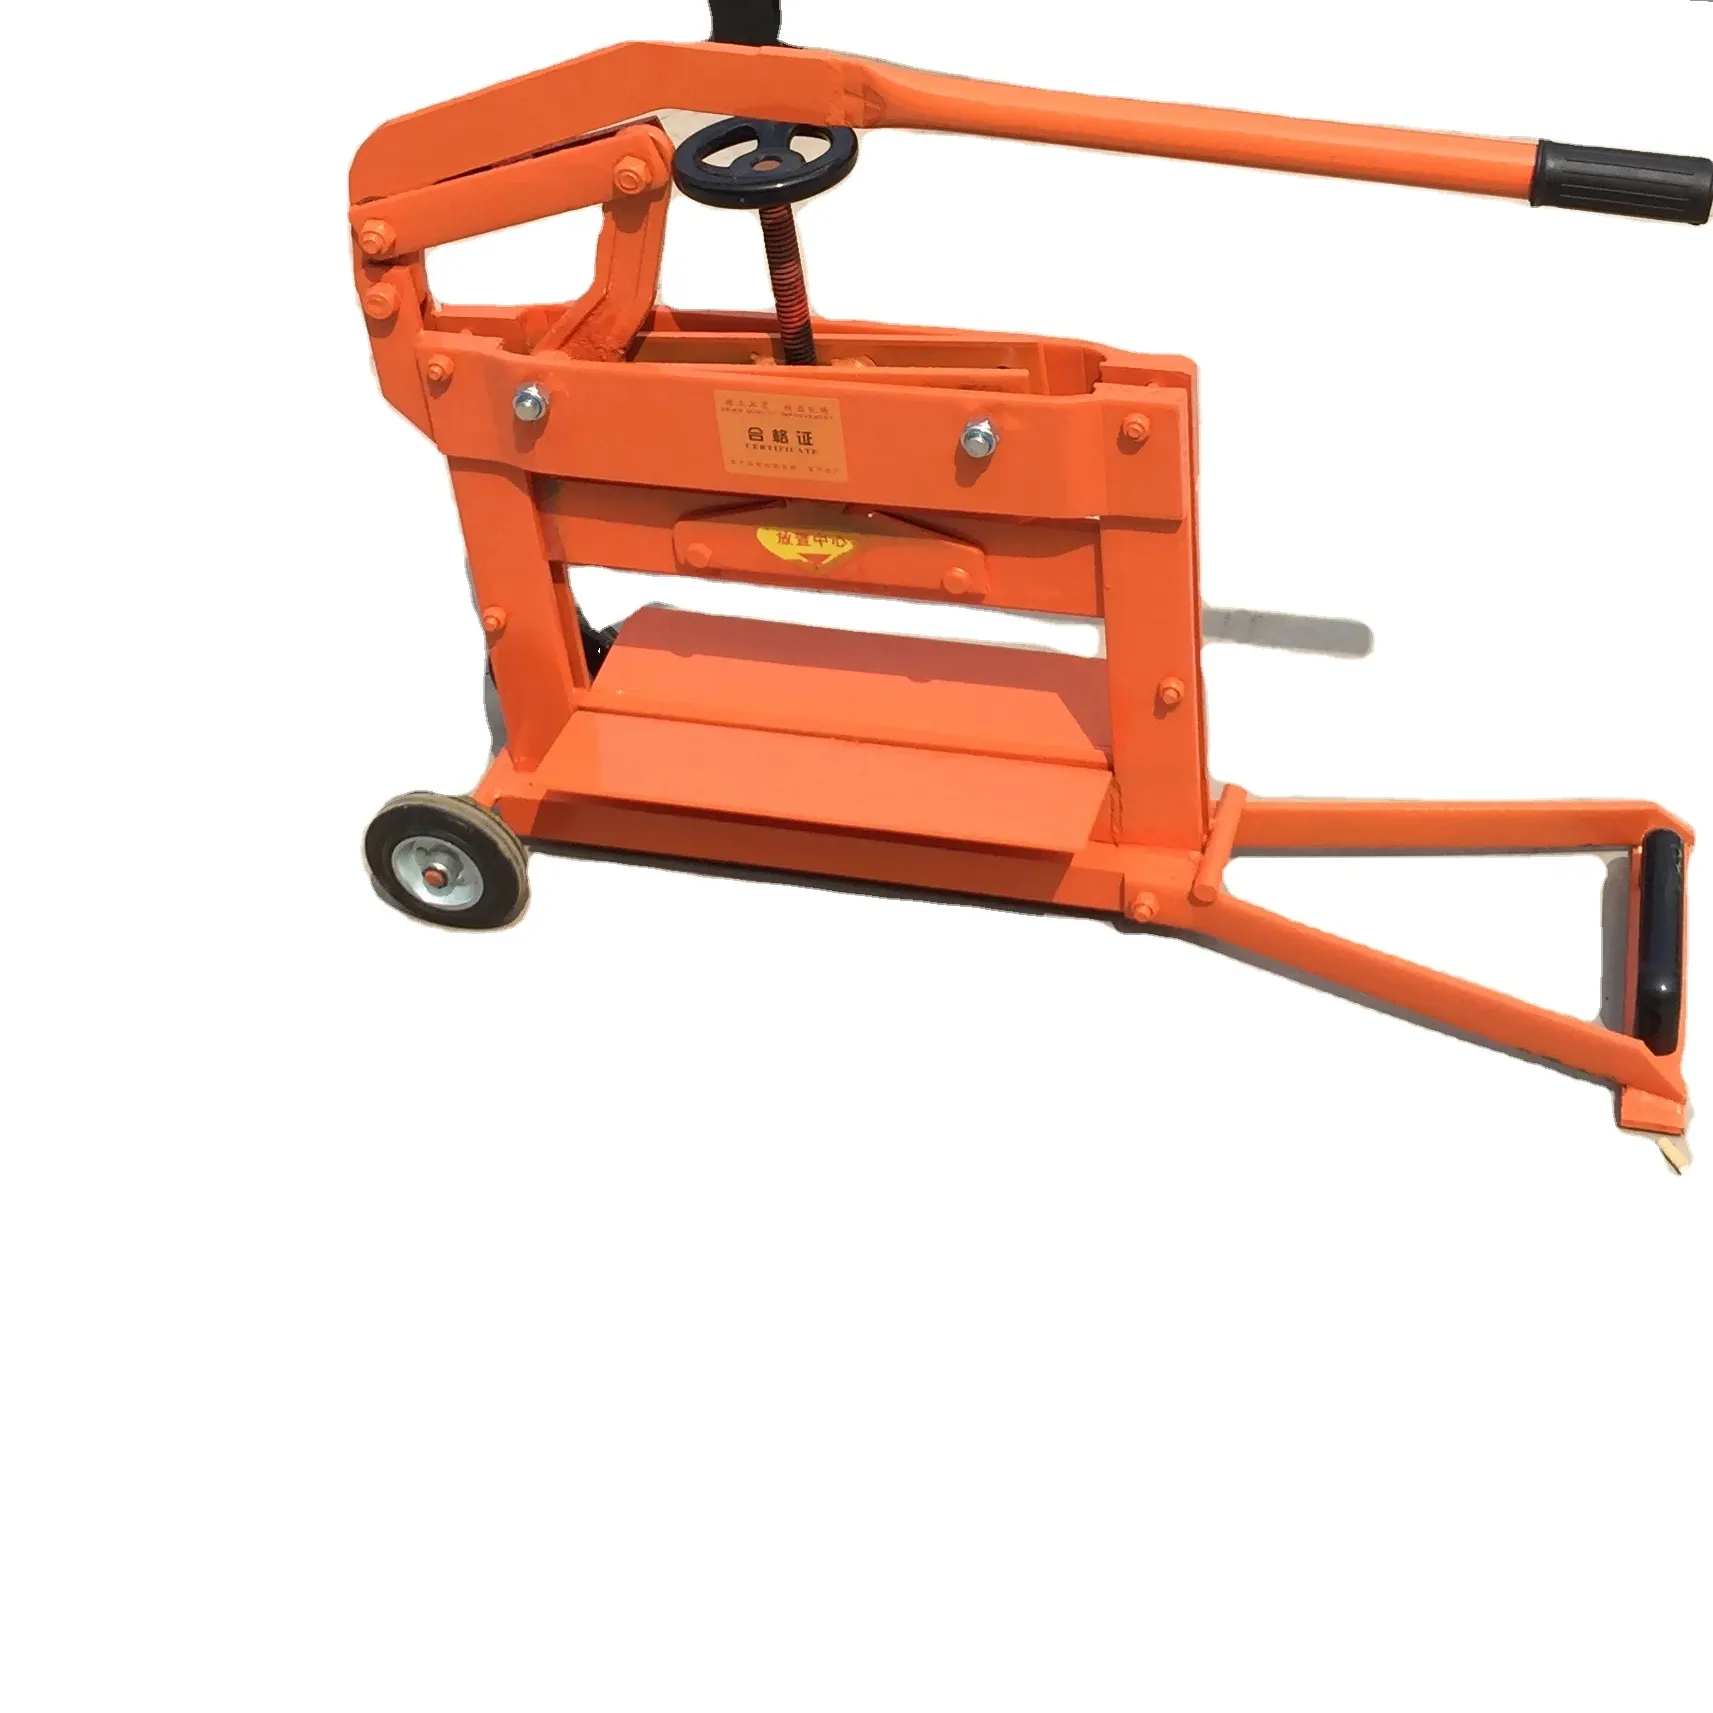 Qingke High efficiency high quality and low price manual brick cutting machine